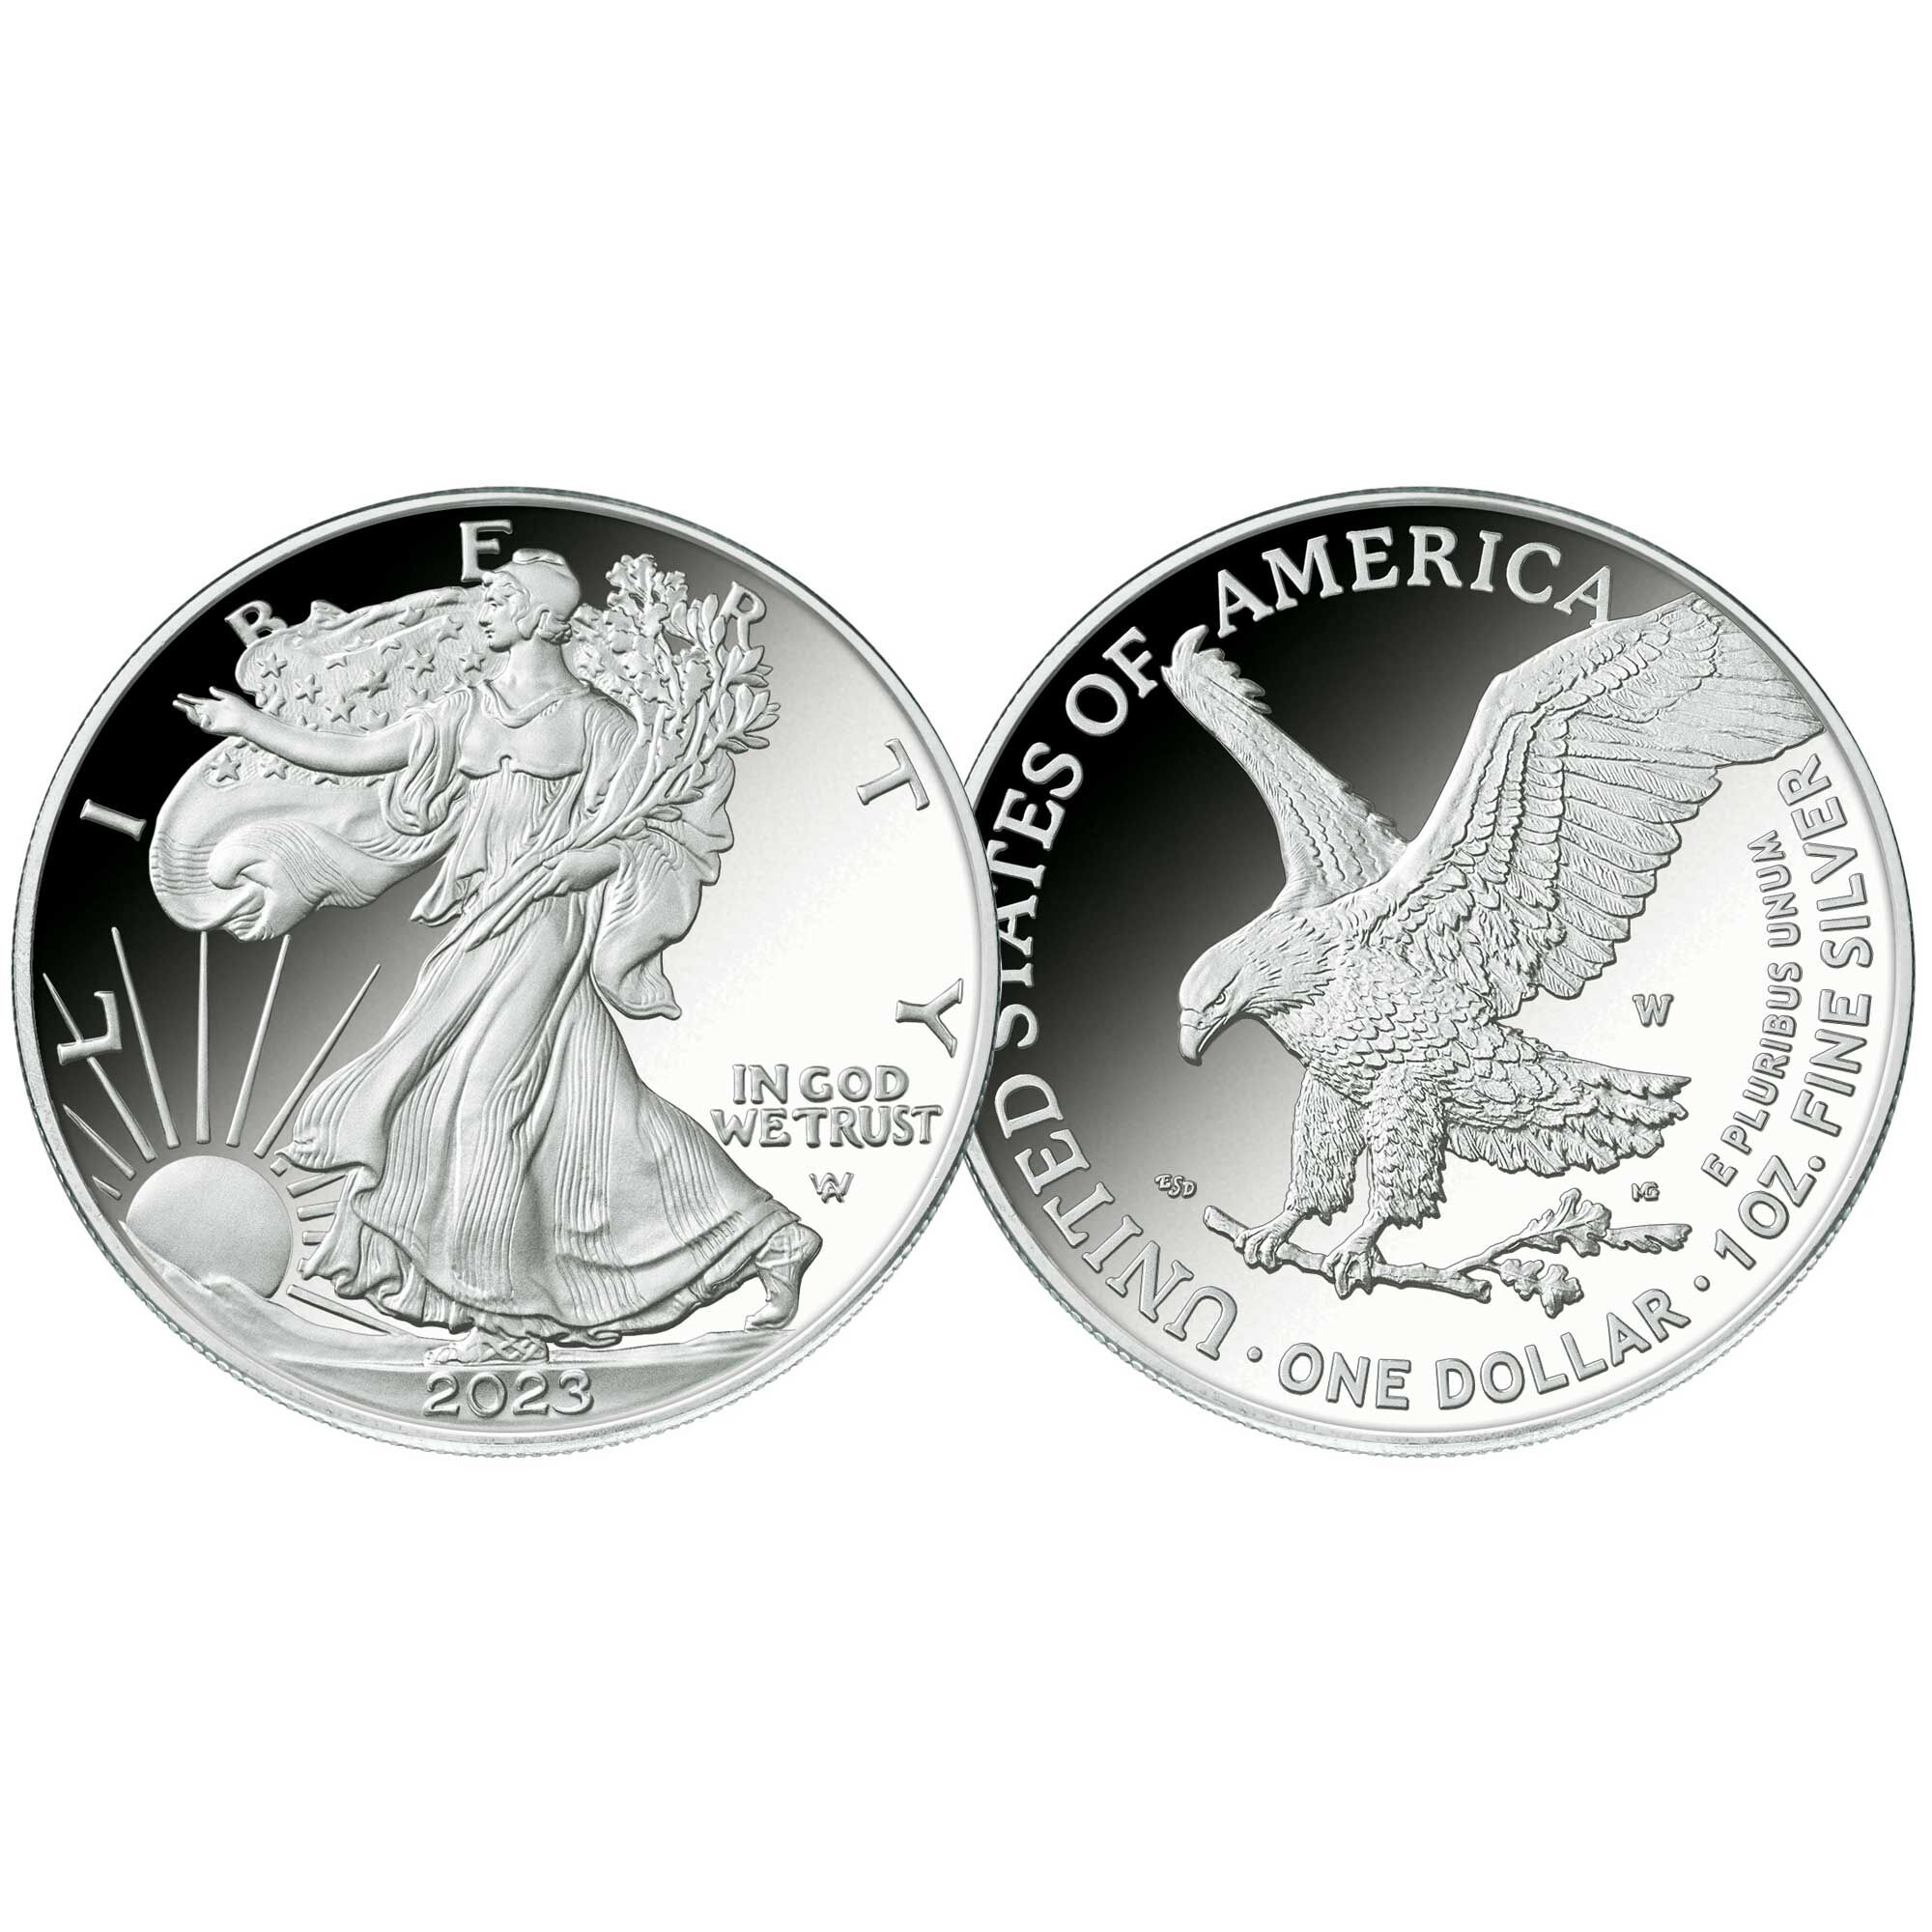 perfect 10 set of 2023 american eagle silver dollars ENX d Coins